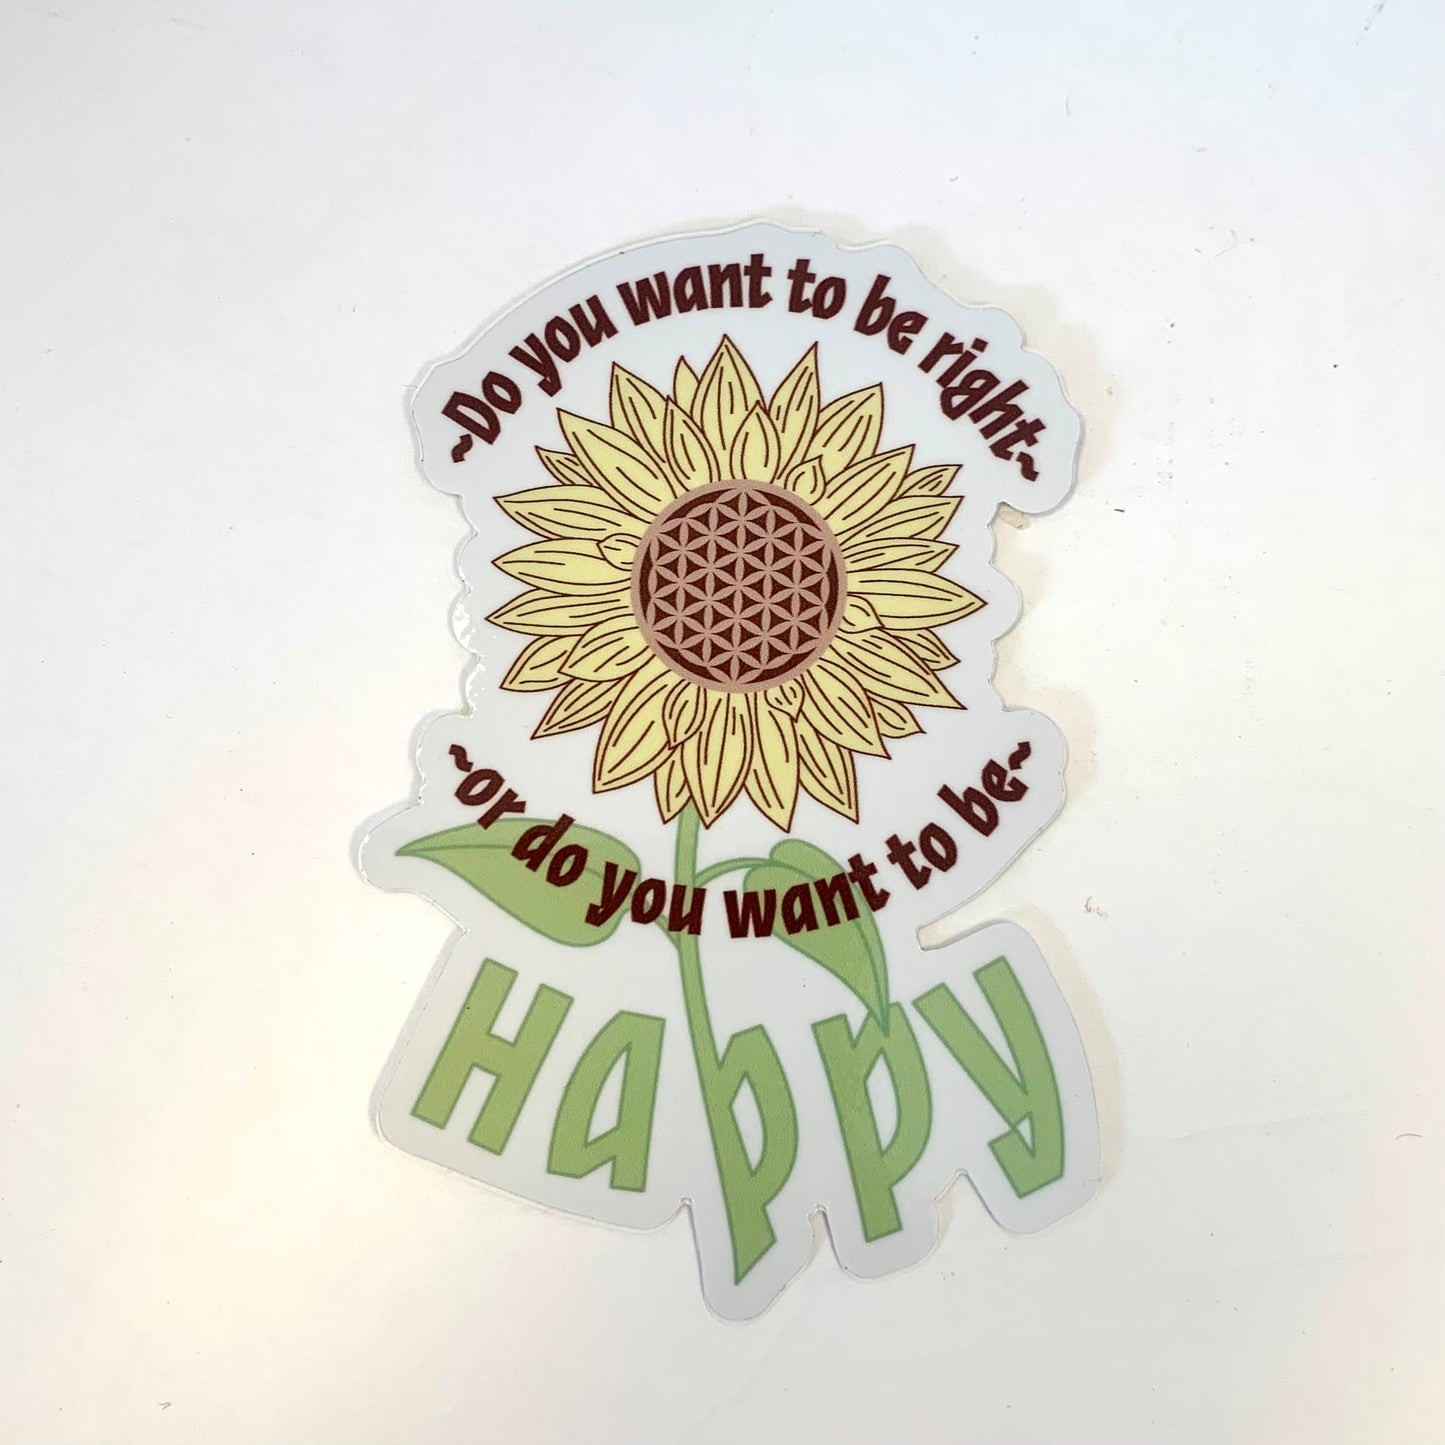 Do you want to be right or do you want to be happy sticker - Pluff Mud Mercantile